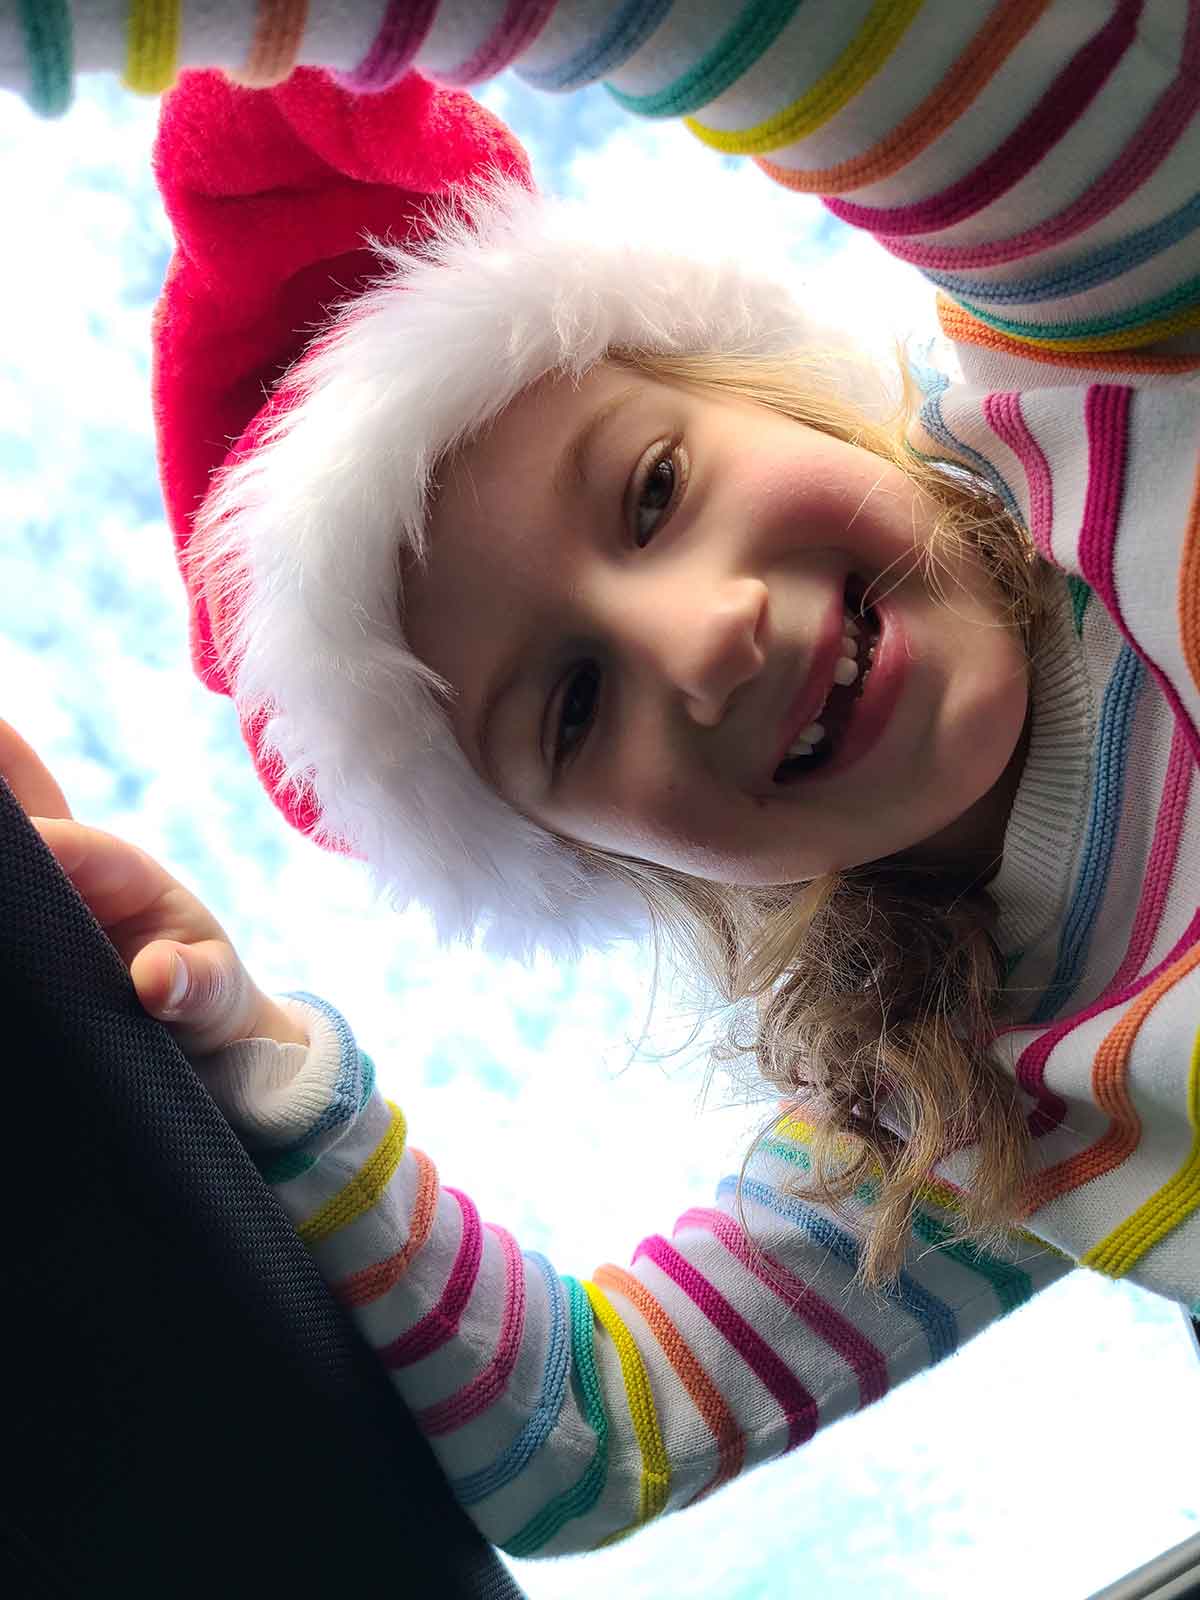 Little girl in santa hat and striped sweater standing in moon roof opening with blue sky in background.